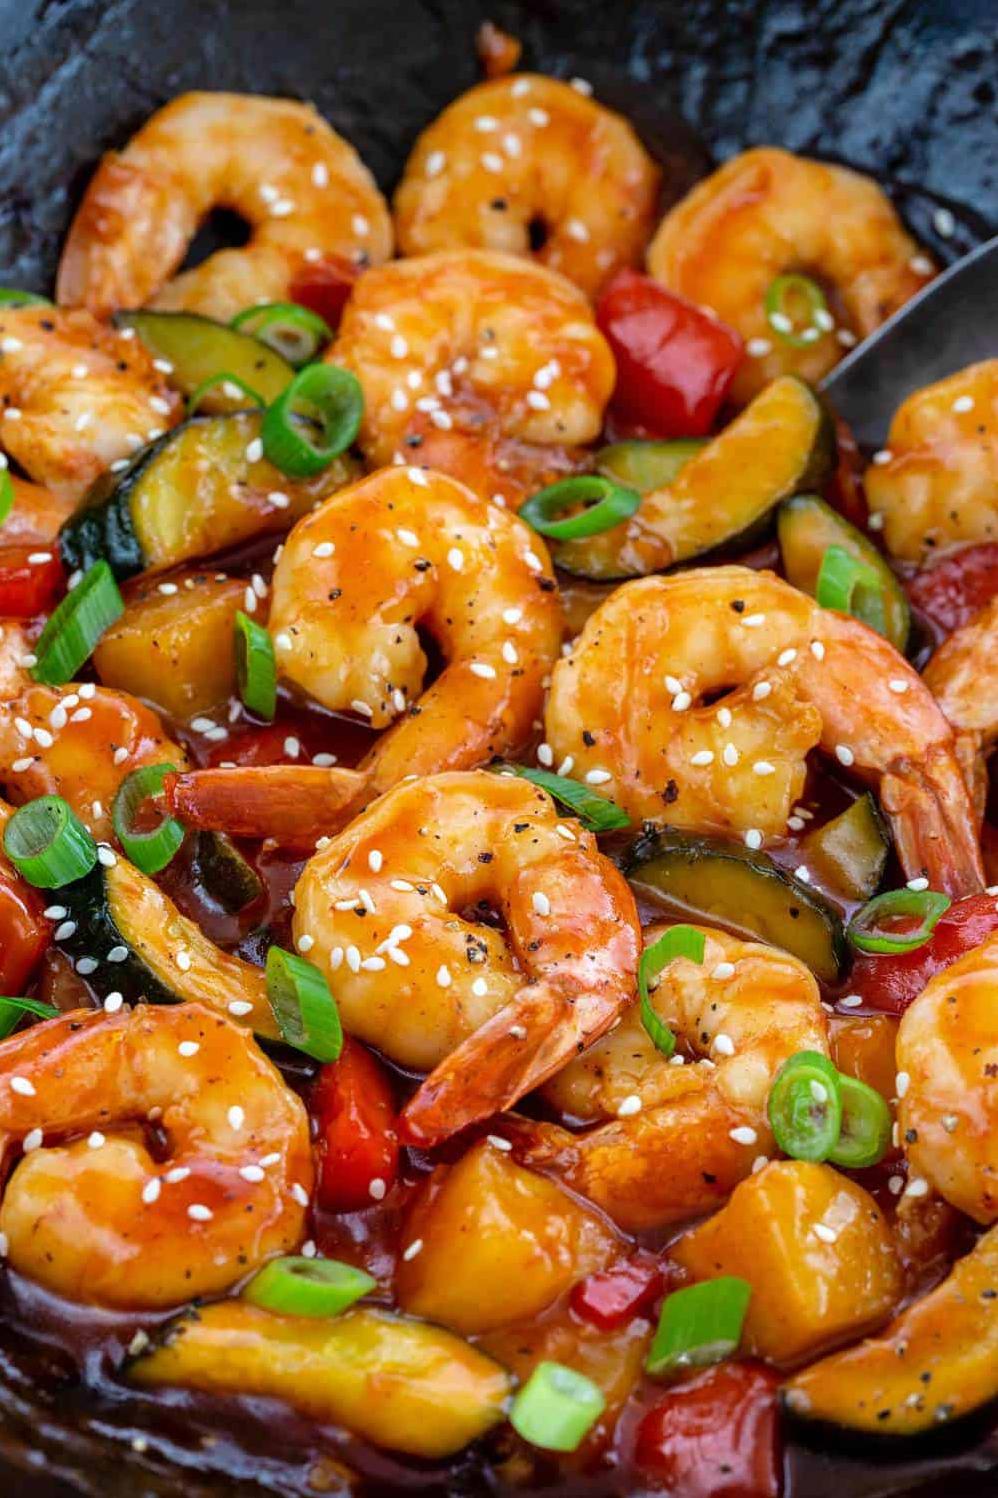  Shrimp just got an upgrade with this fancy, yet easy to make, recipe.